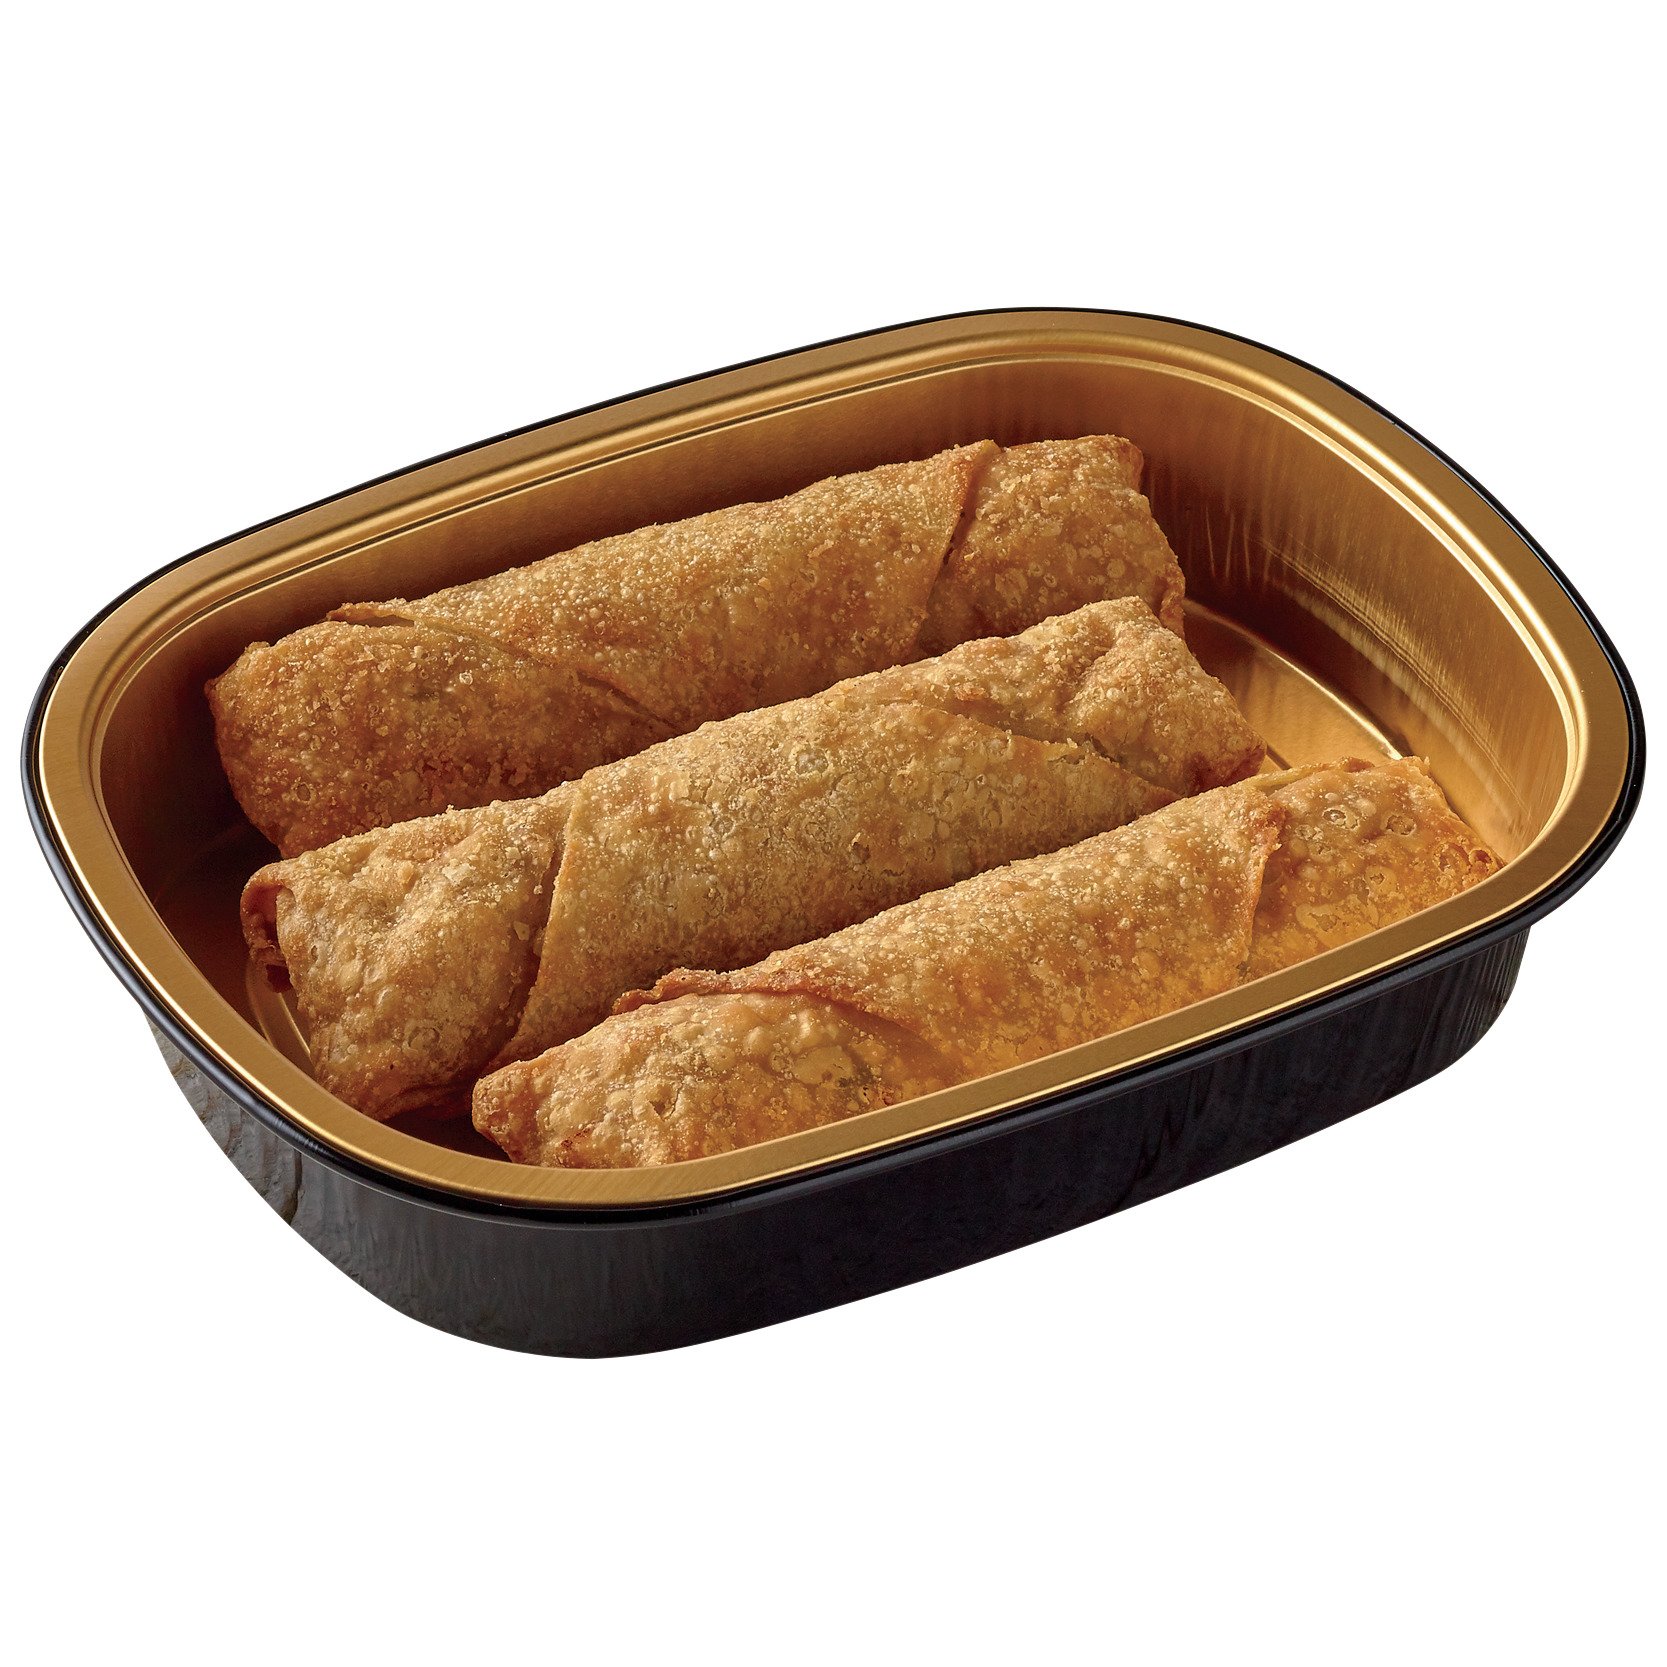 Feel Good Foods Chicken Egg Rolls - Shop Appetizers at H-E-B